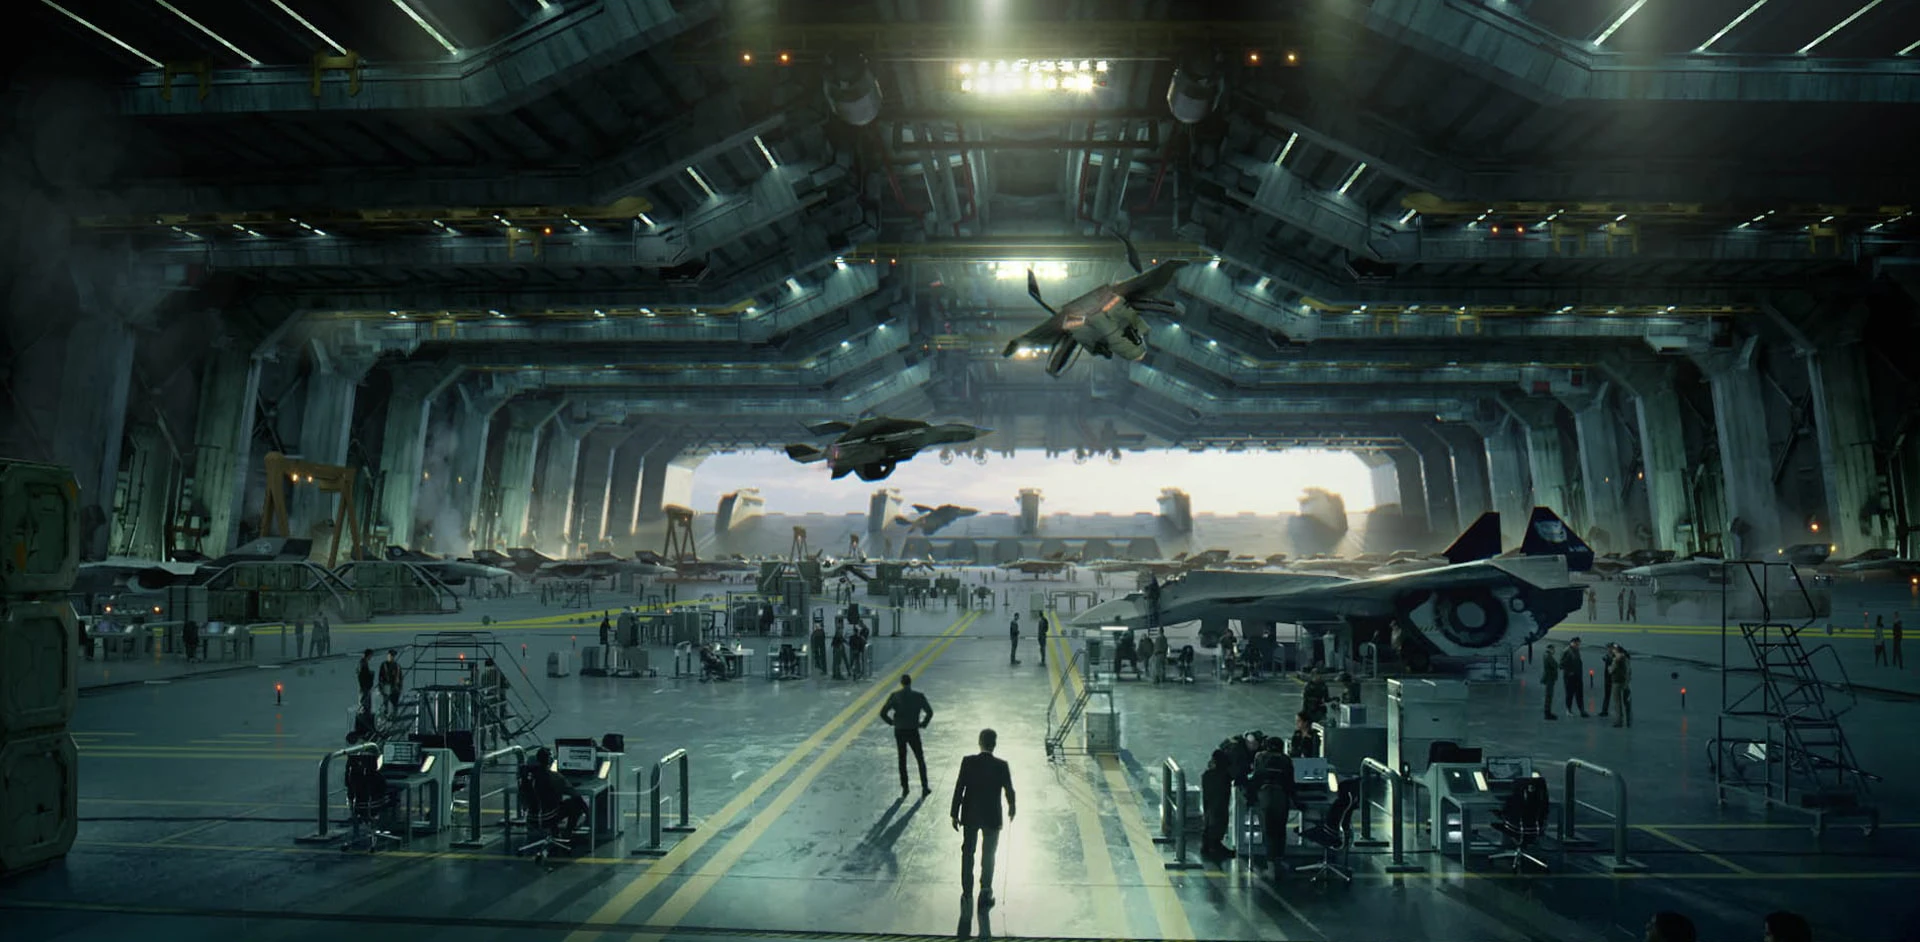 Hangar view with spaceships flying, concept art from Raynault vfx